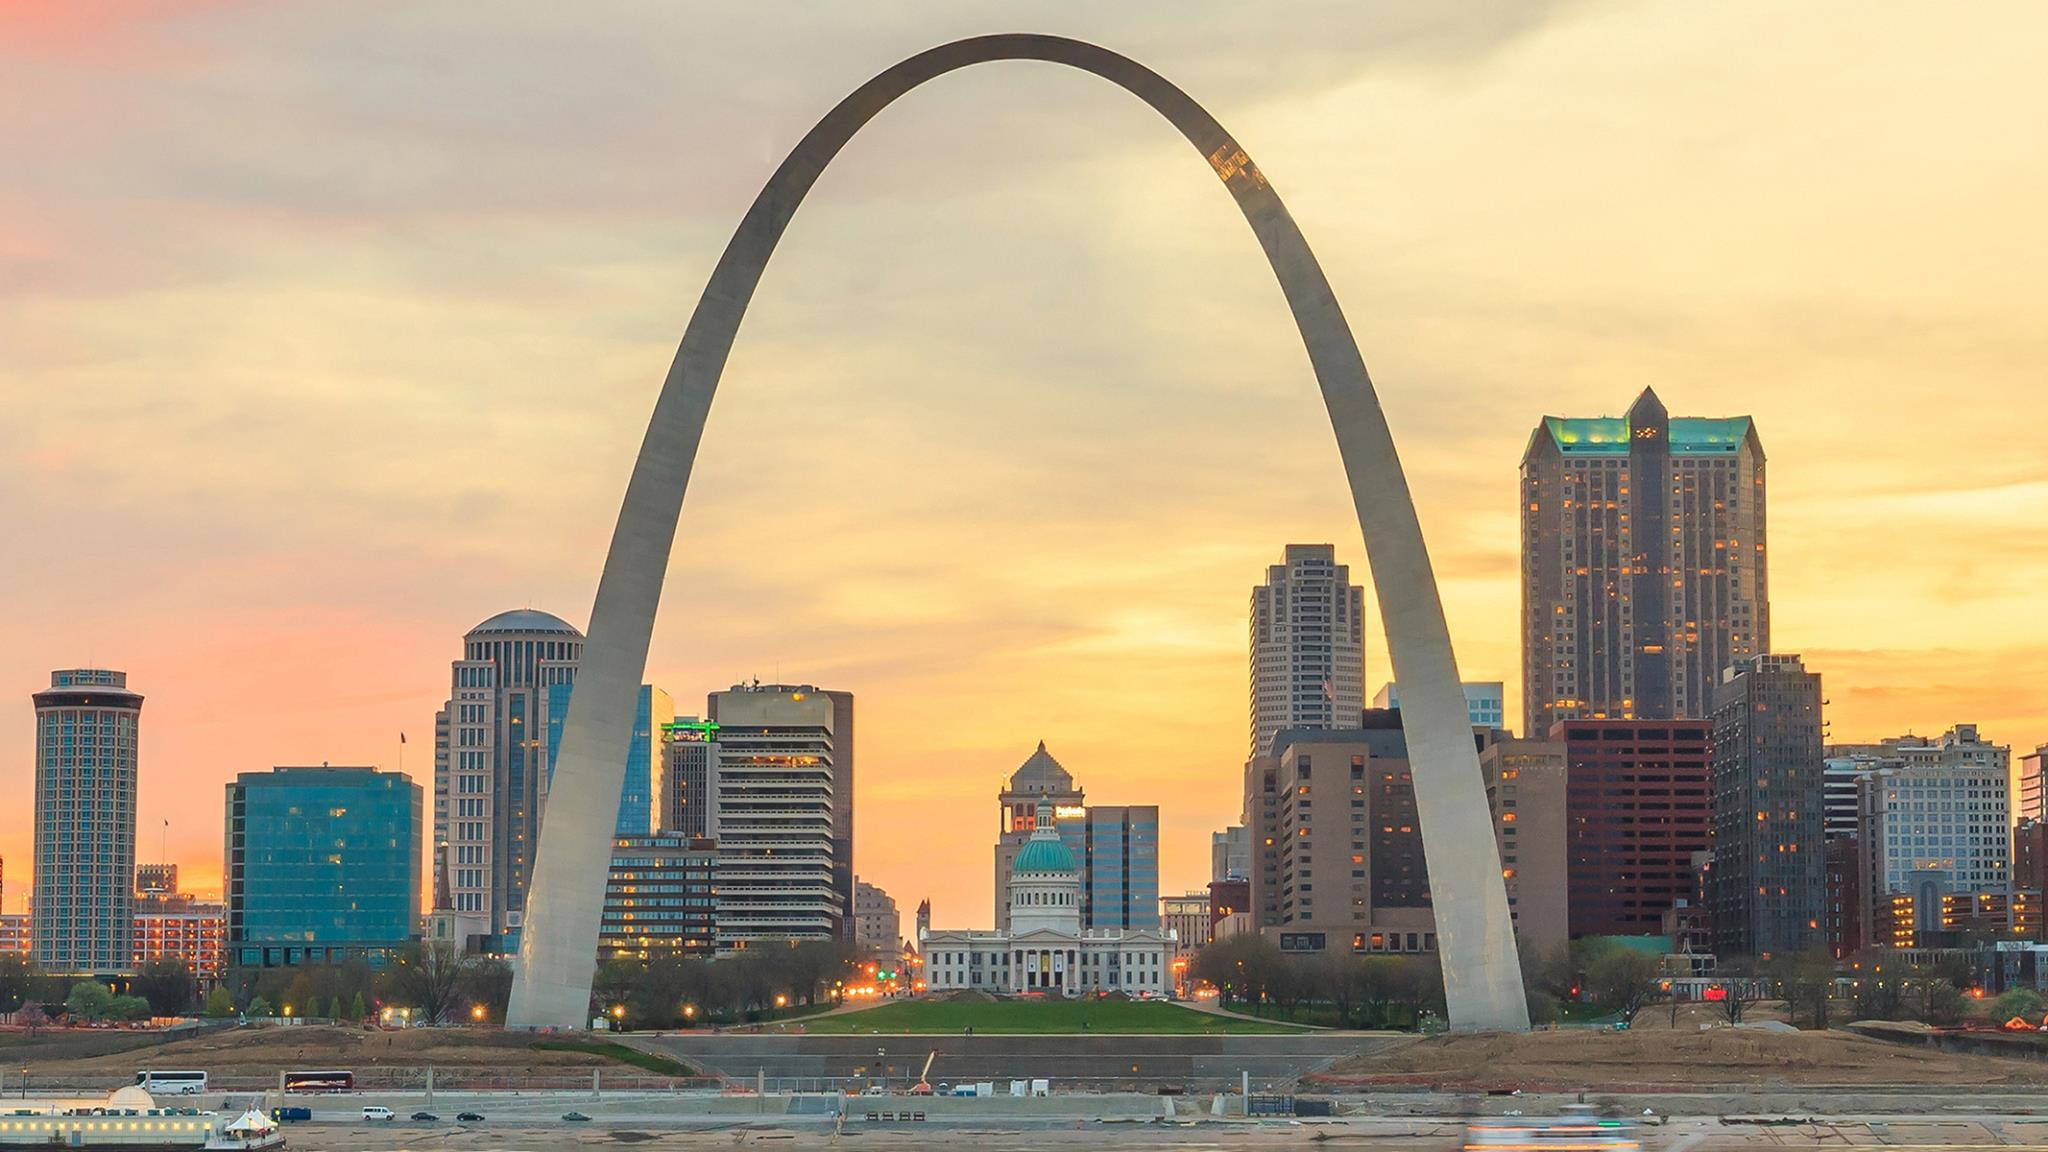 St louis arch wallpaper Gallery